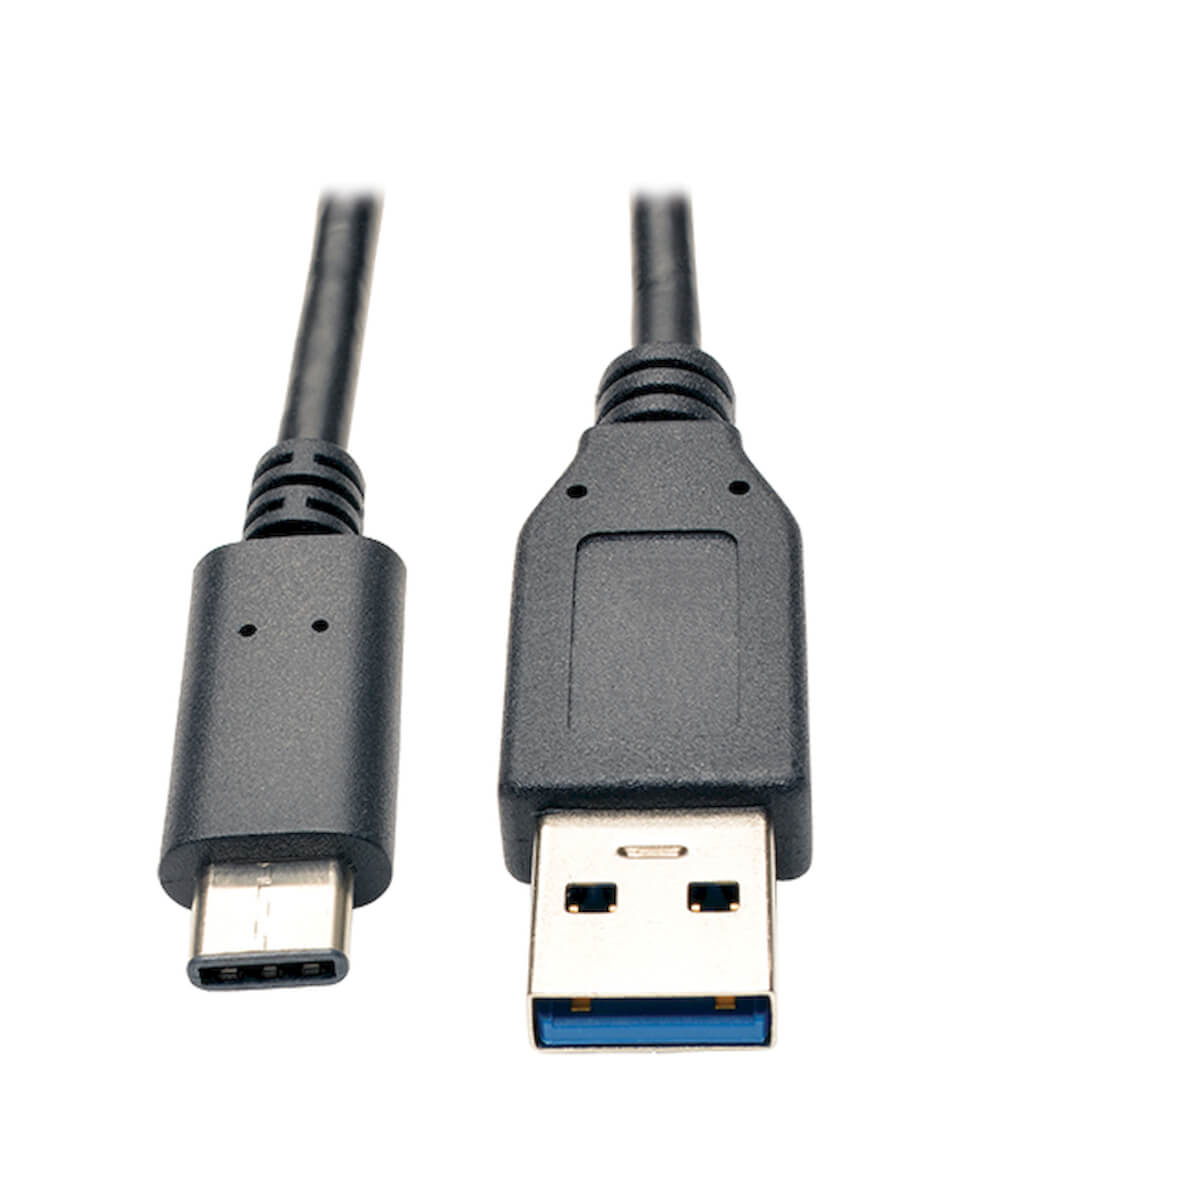 Tripp Lite U428-003 USB-C to USB-A Cable (M/M), USB 3.1 Gen 1 (5 Gbps),  Thunderbolt 3 Compatible, 3 ft. (0.91 m) UK's leading supplier of IT  hardware